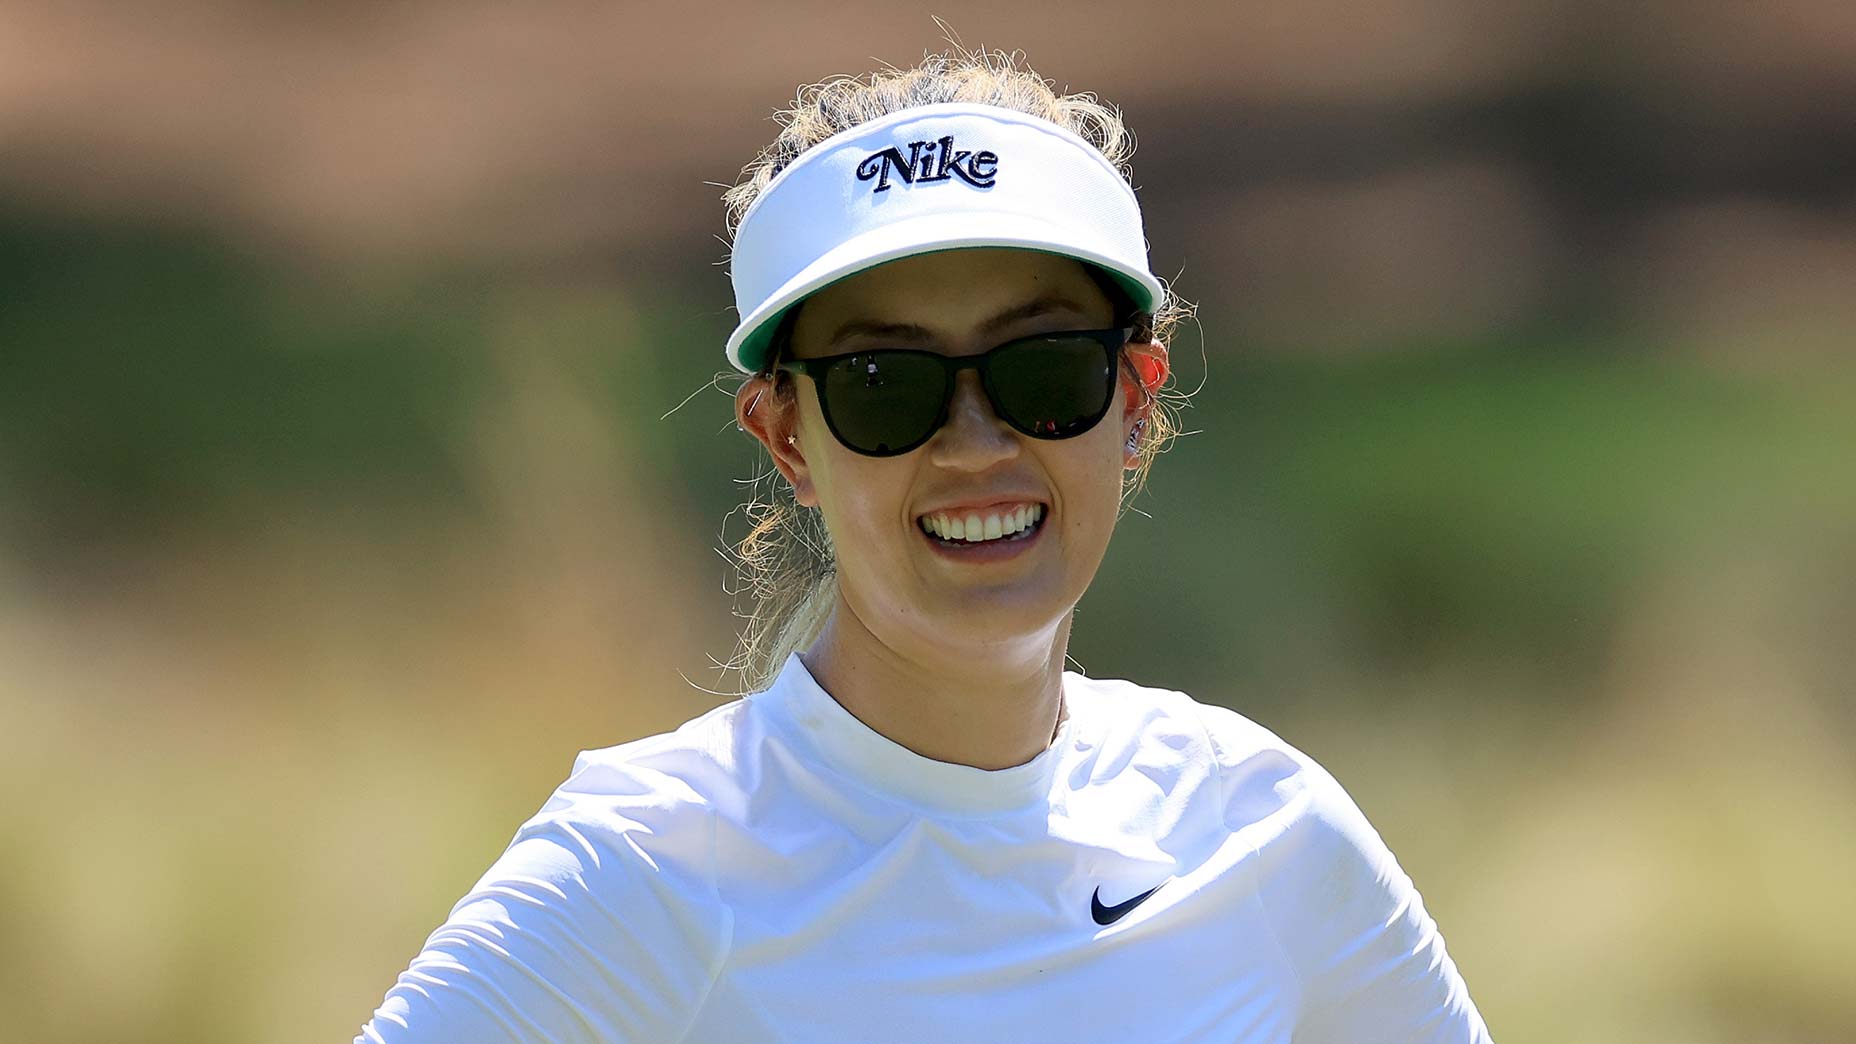 Michelle Wie West won’t be playing on tour anymore, but she’s staying as involved in golf as ever